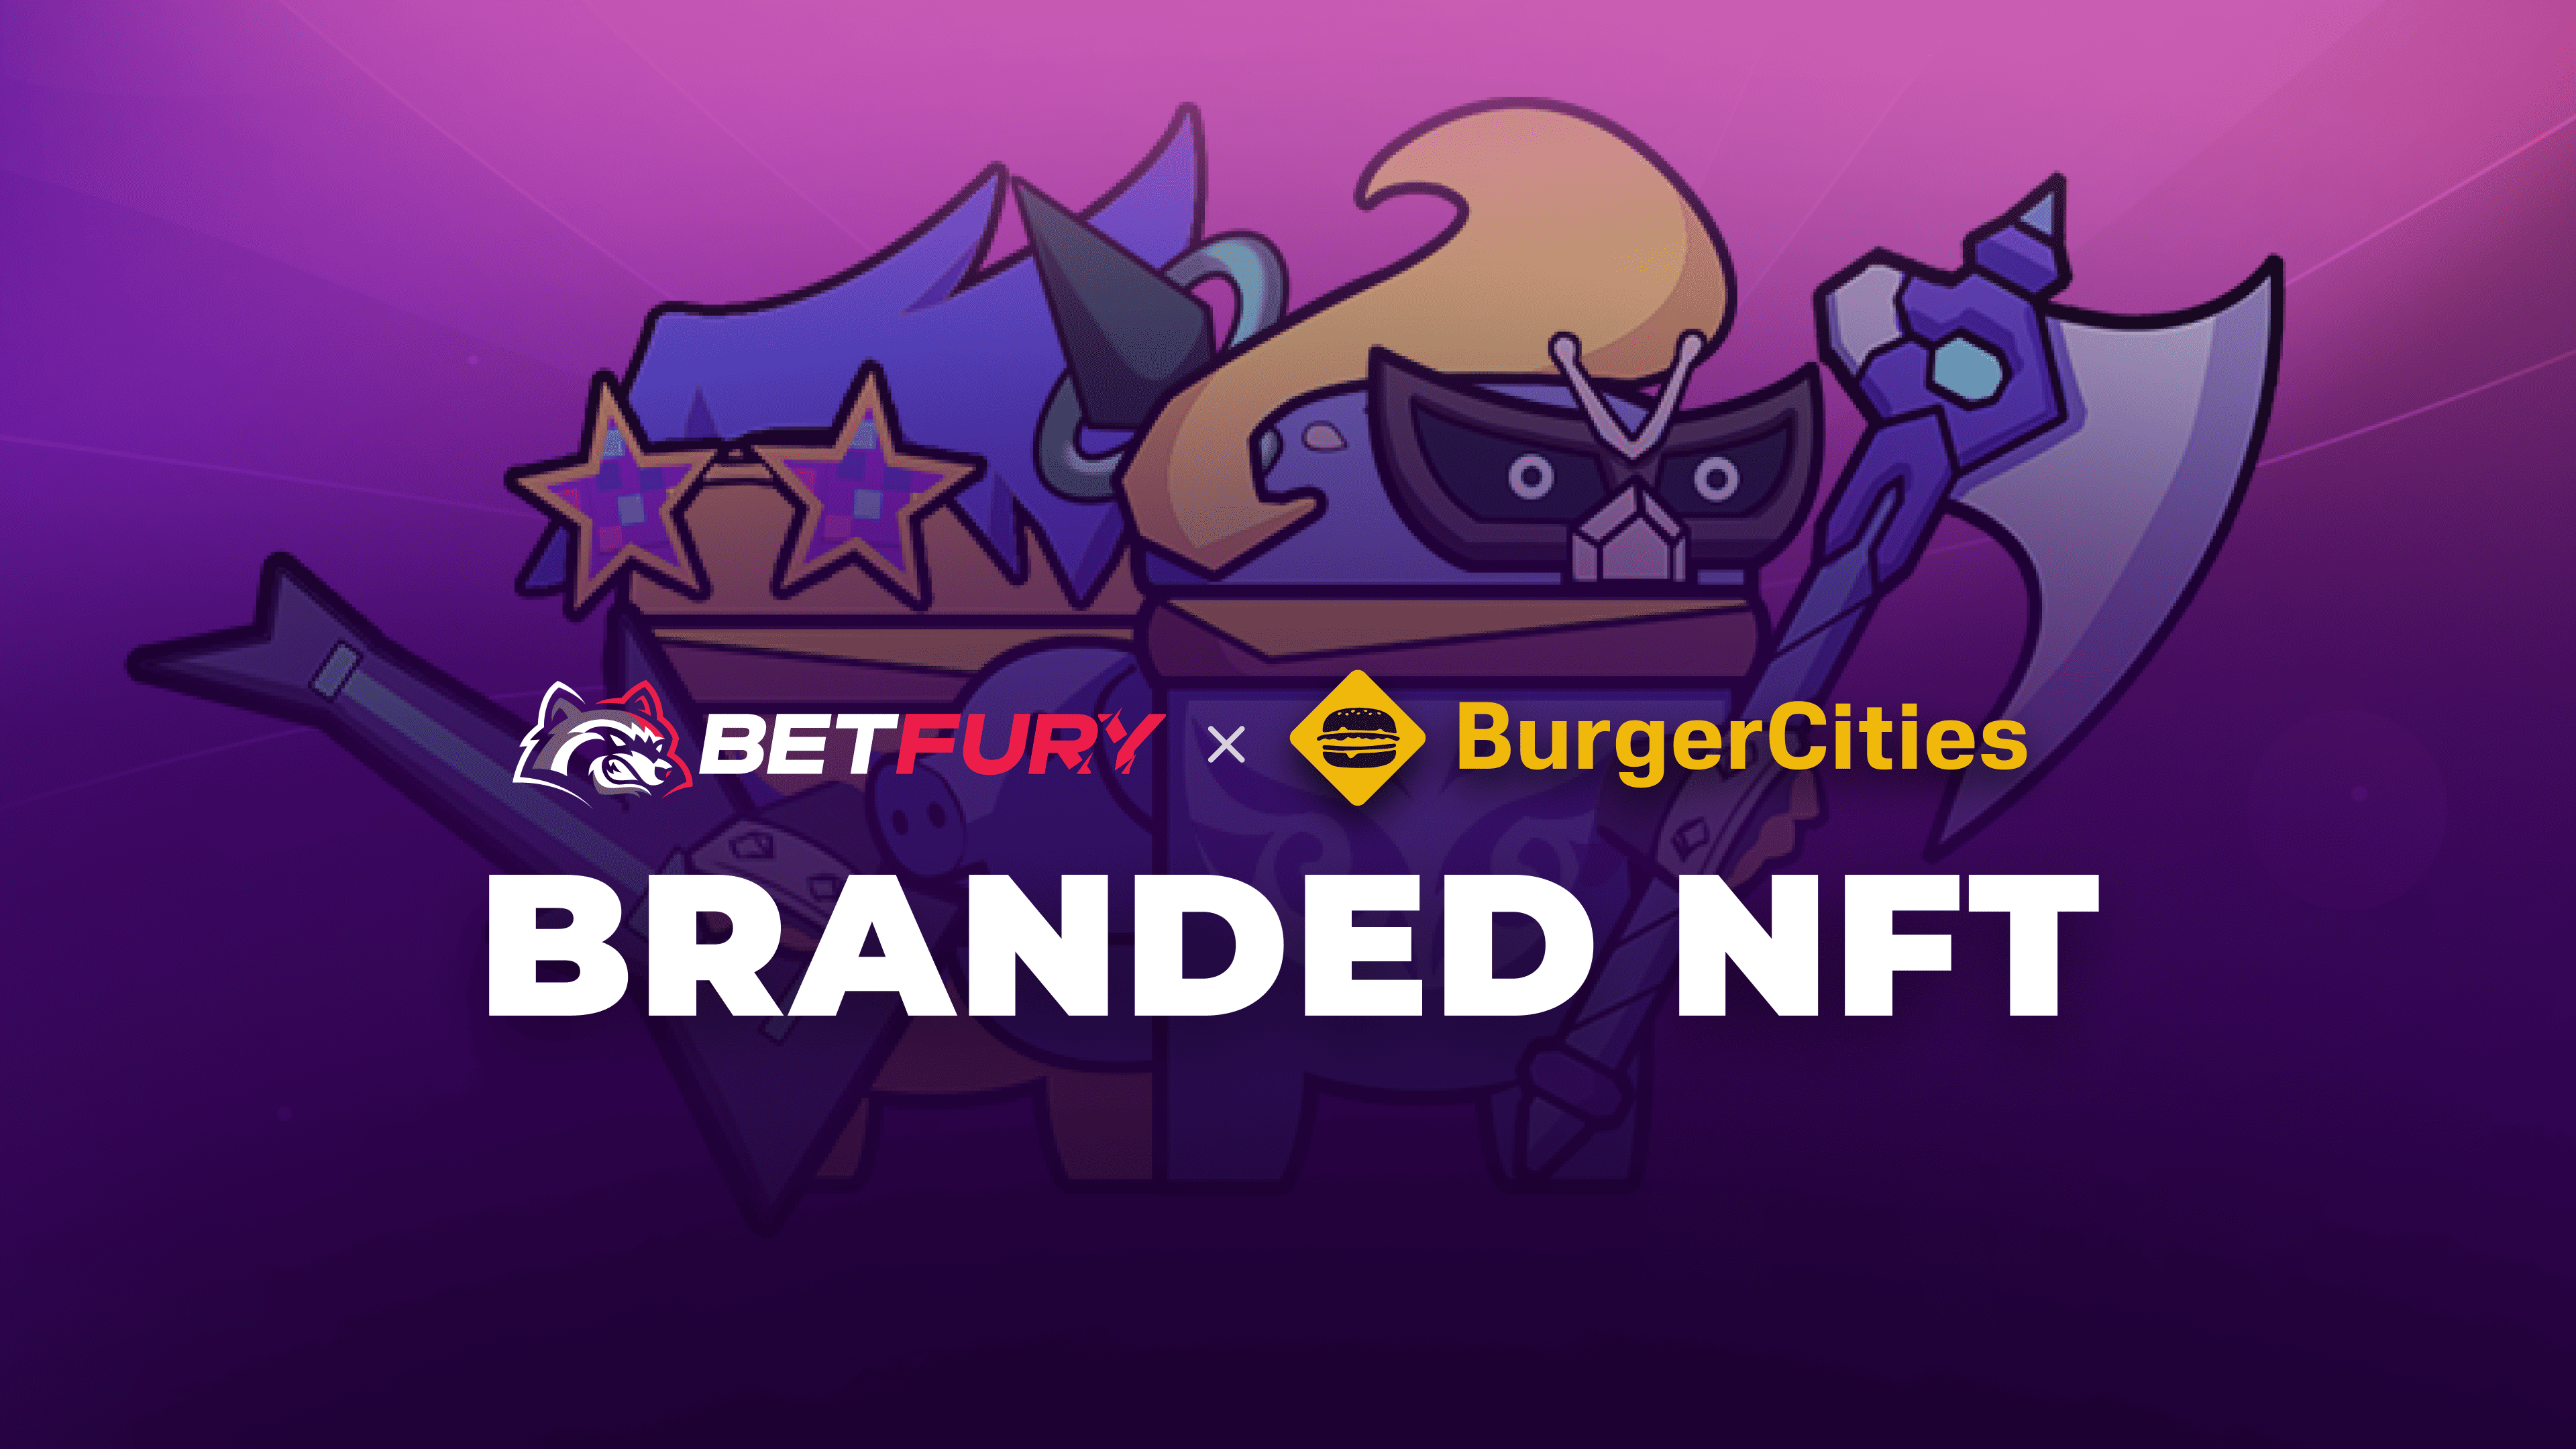 Betfury-and-burgercities-collaboration-allows-users-to-get-100-free-nfts